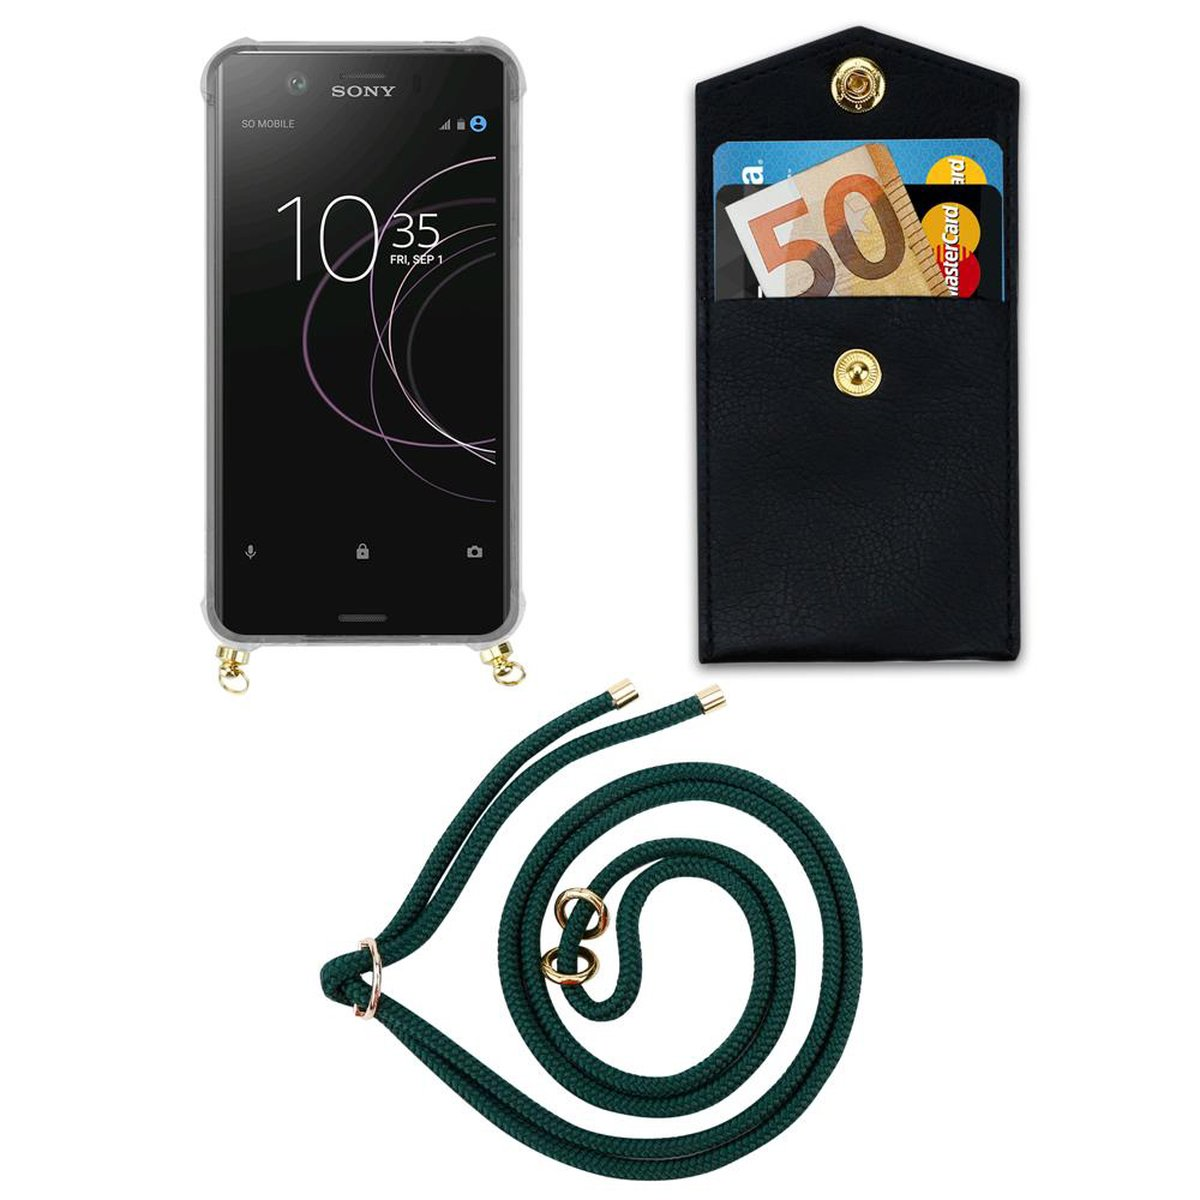 Kette XZ1 Kordel und COMPACT, Backcover, Xperia CADORABO Hülle, mit Handy Band GRÜN Sony, abnehmbarer ARMEE Gold Ringen,